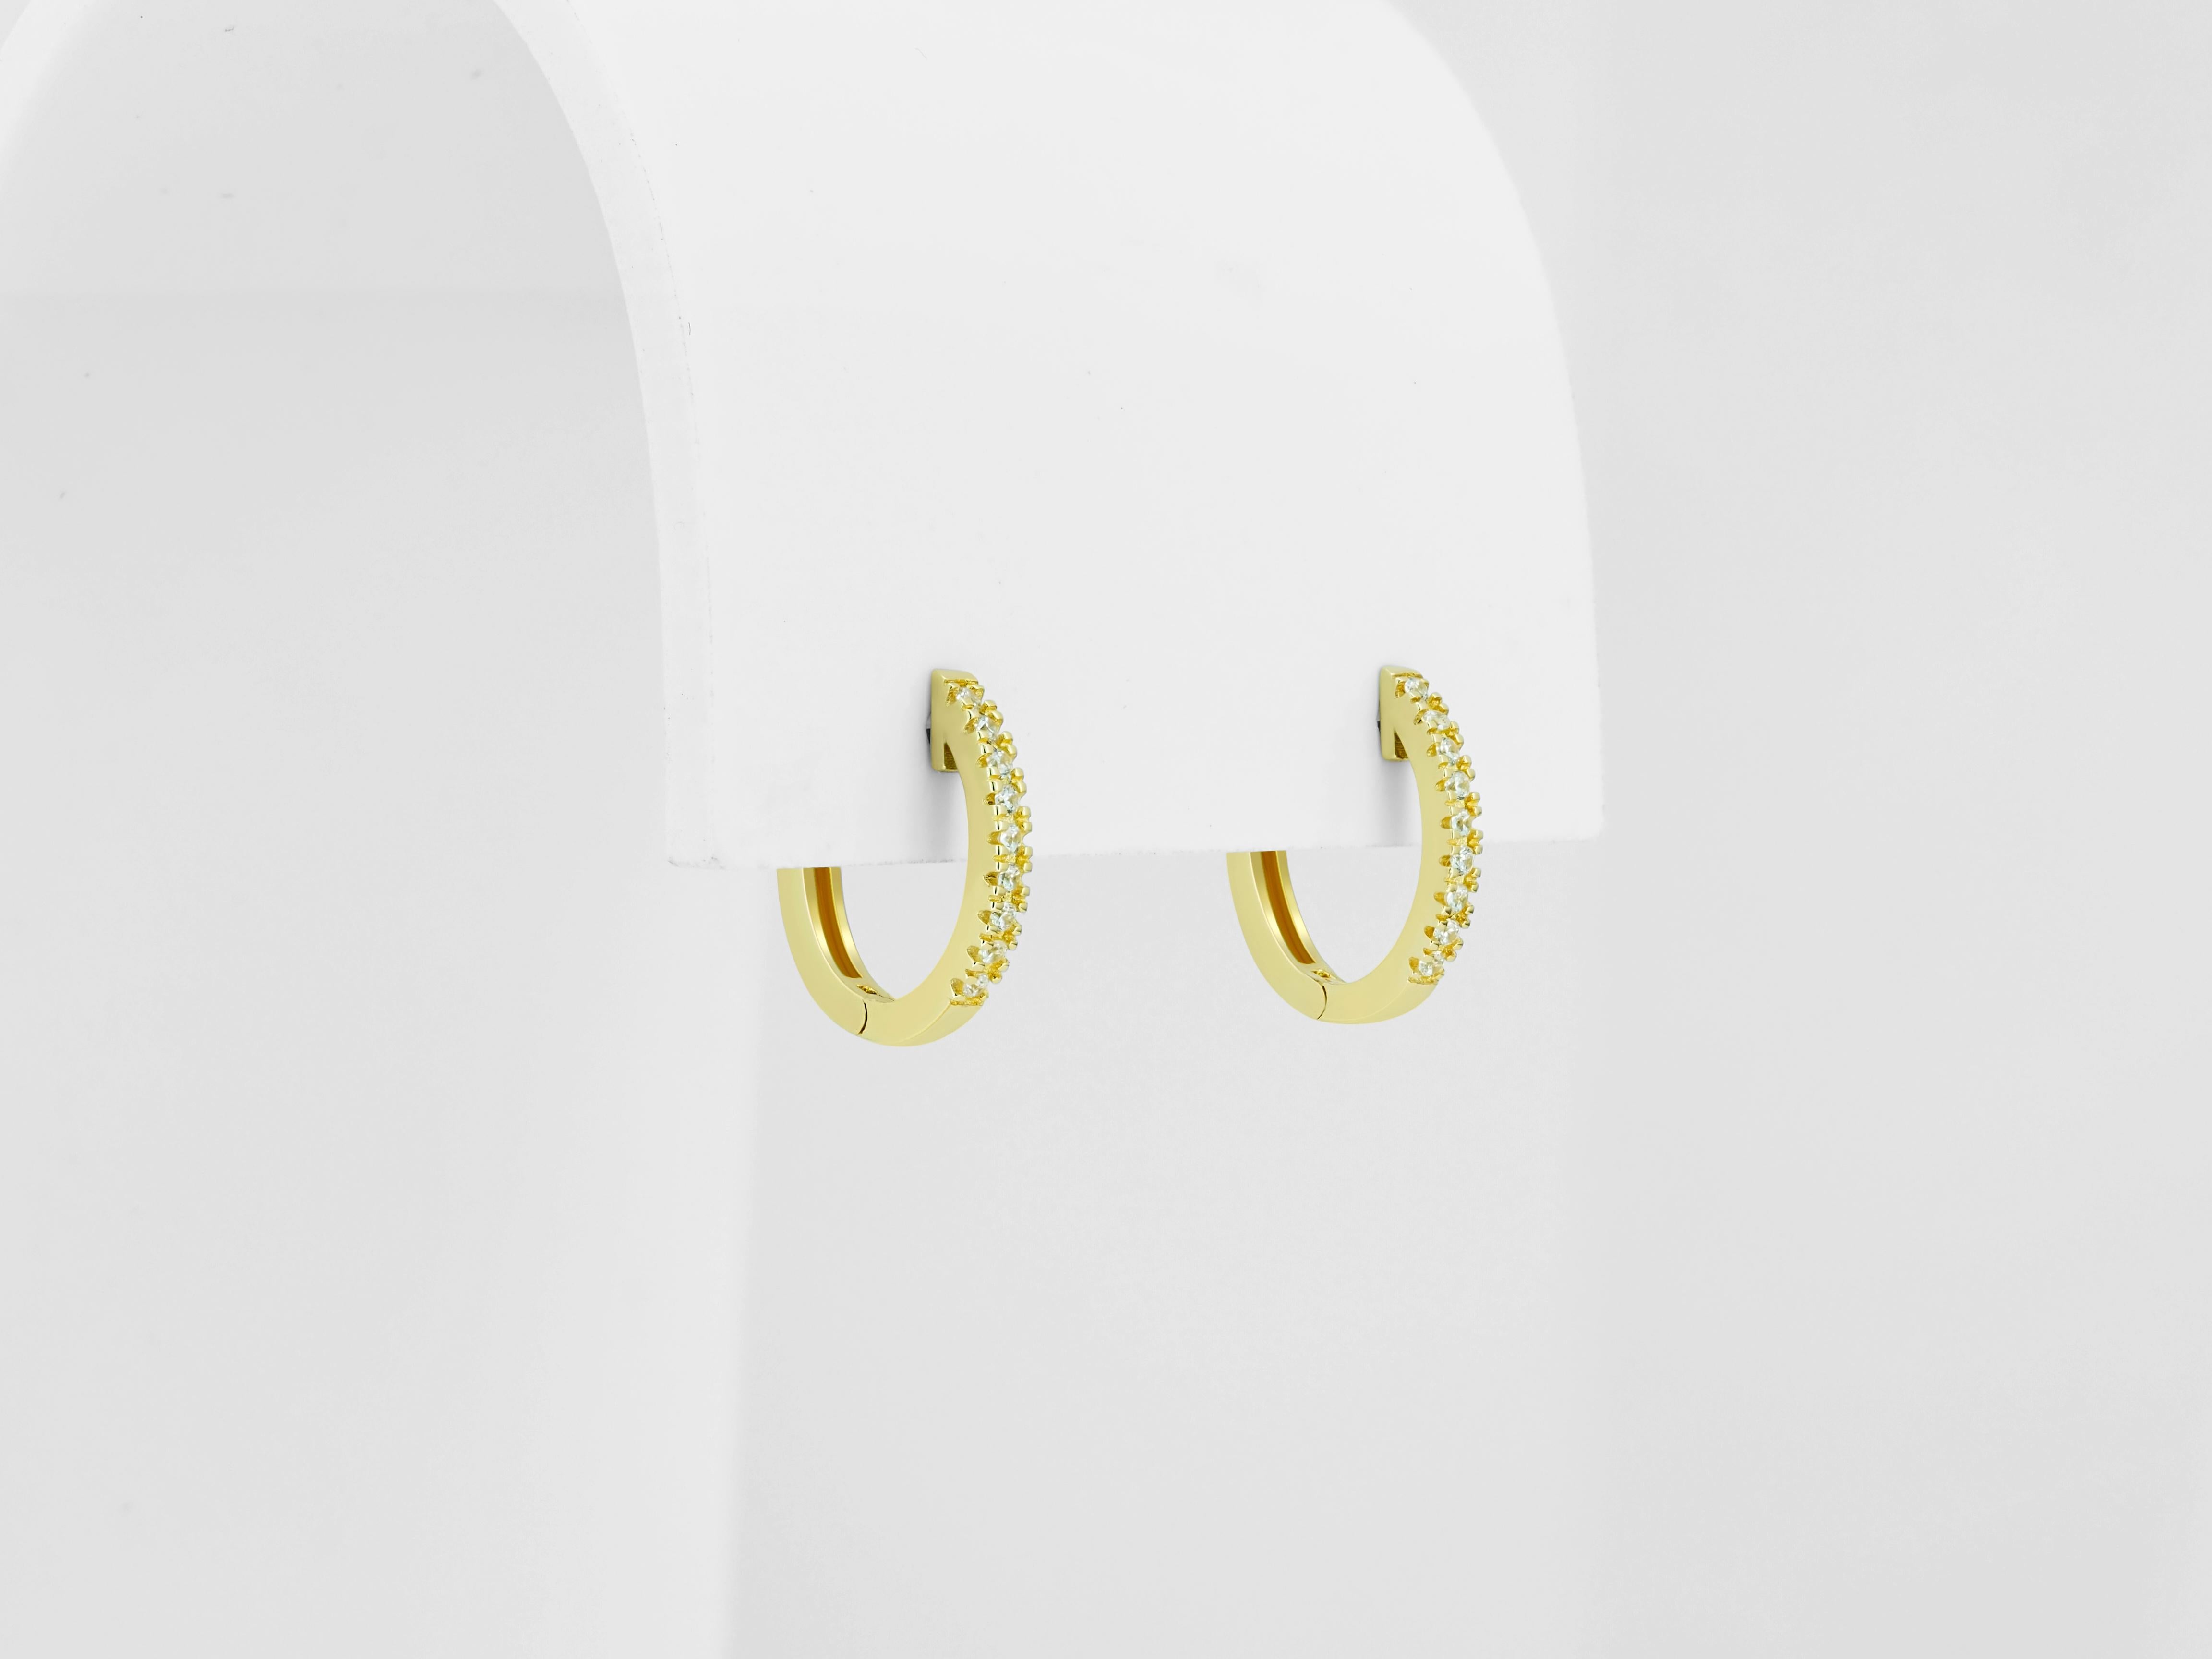 gold hoop earrings with interchangeable charms